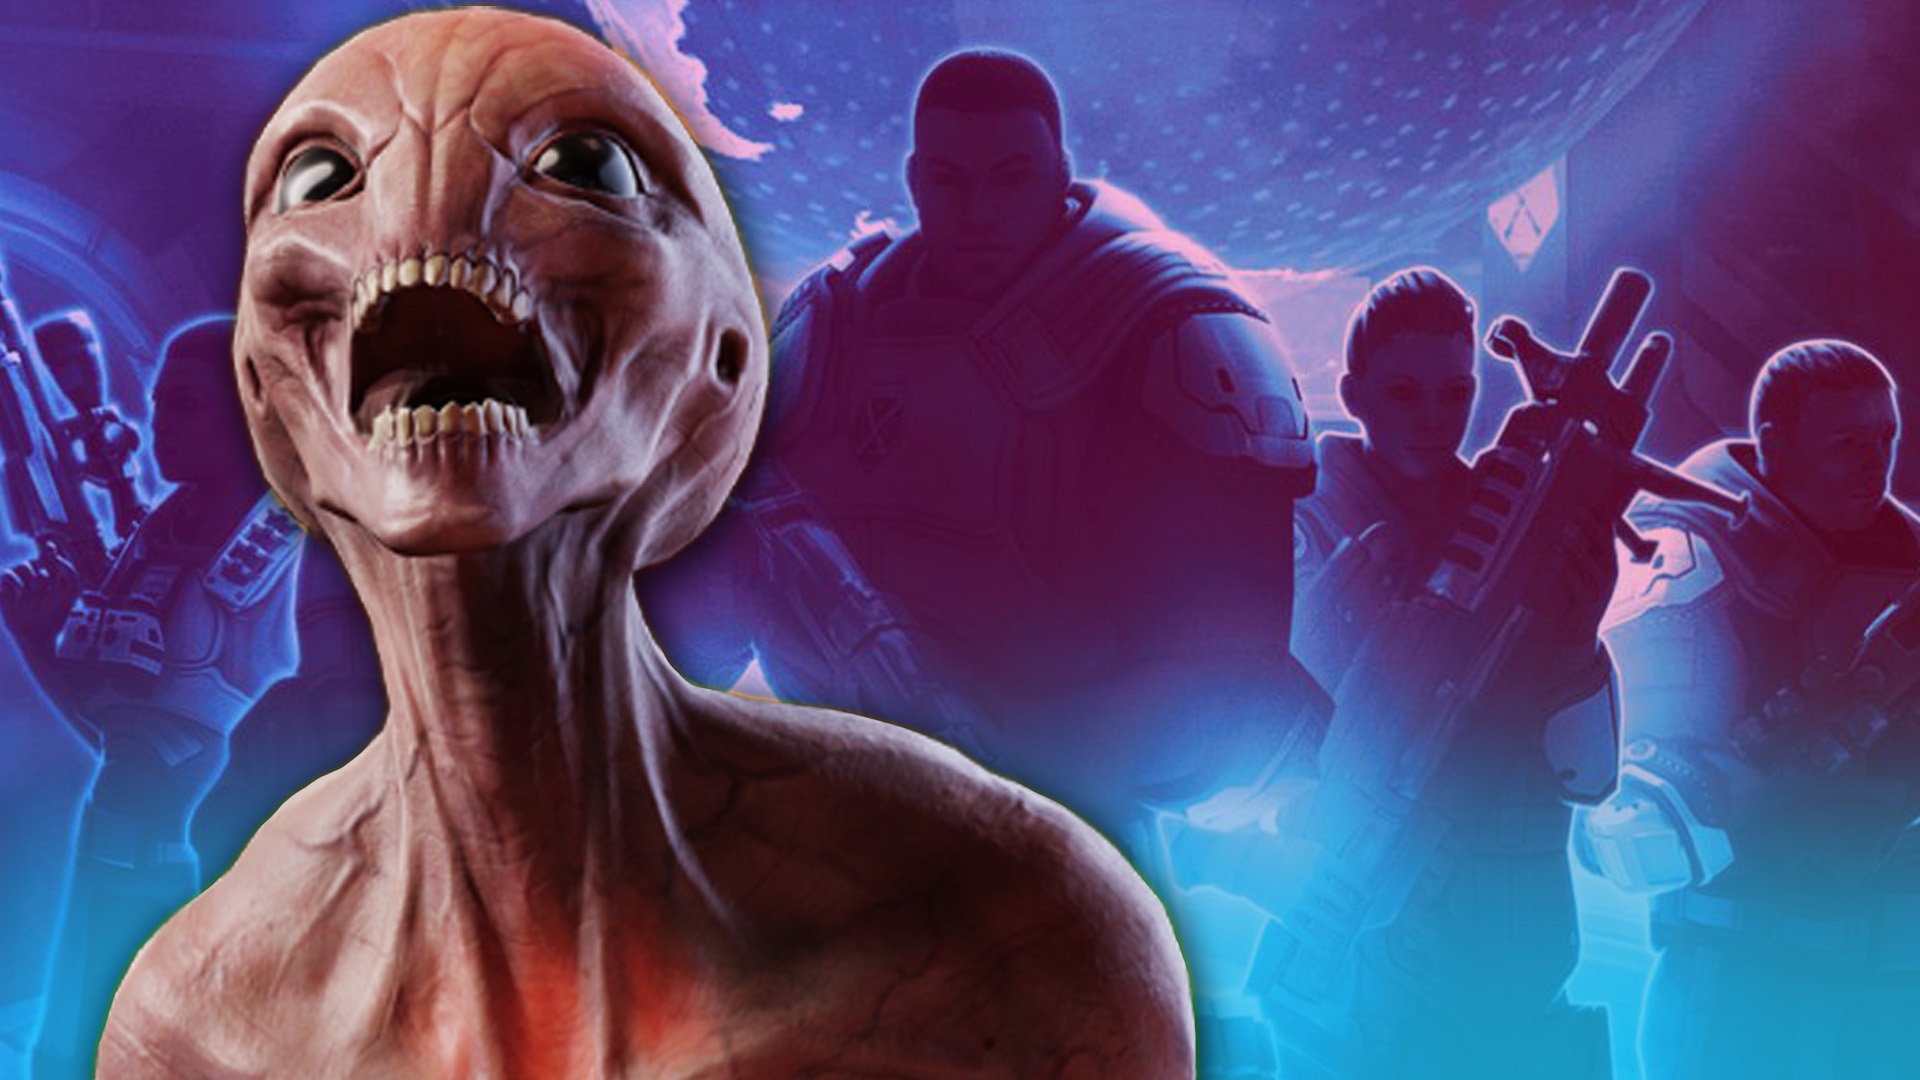 A grey alien Sectoid from the XCOM game franchise makes a screaming face while silhouettes of XCOM soldiers stand behind.